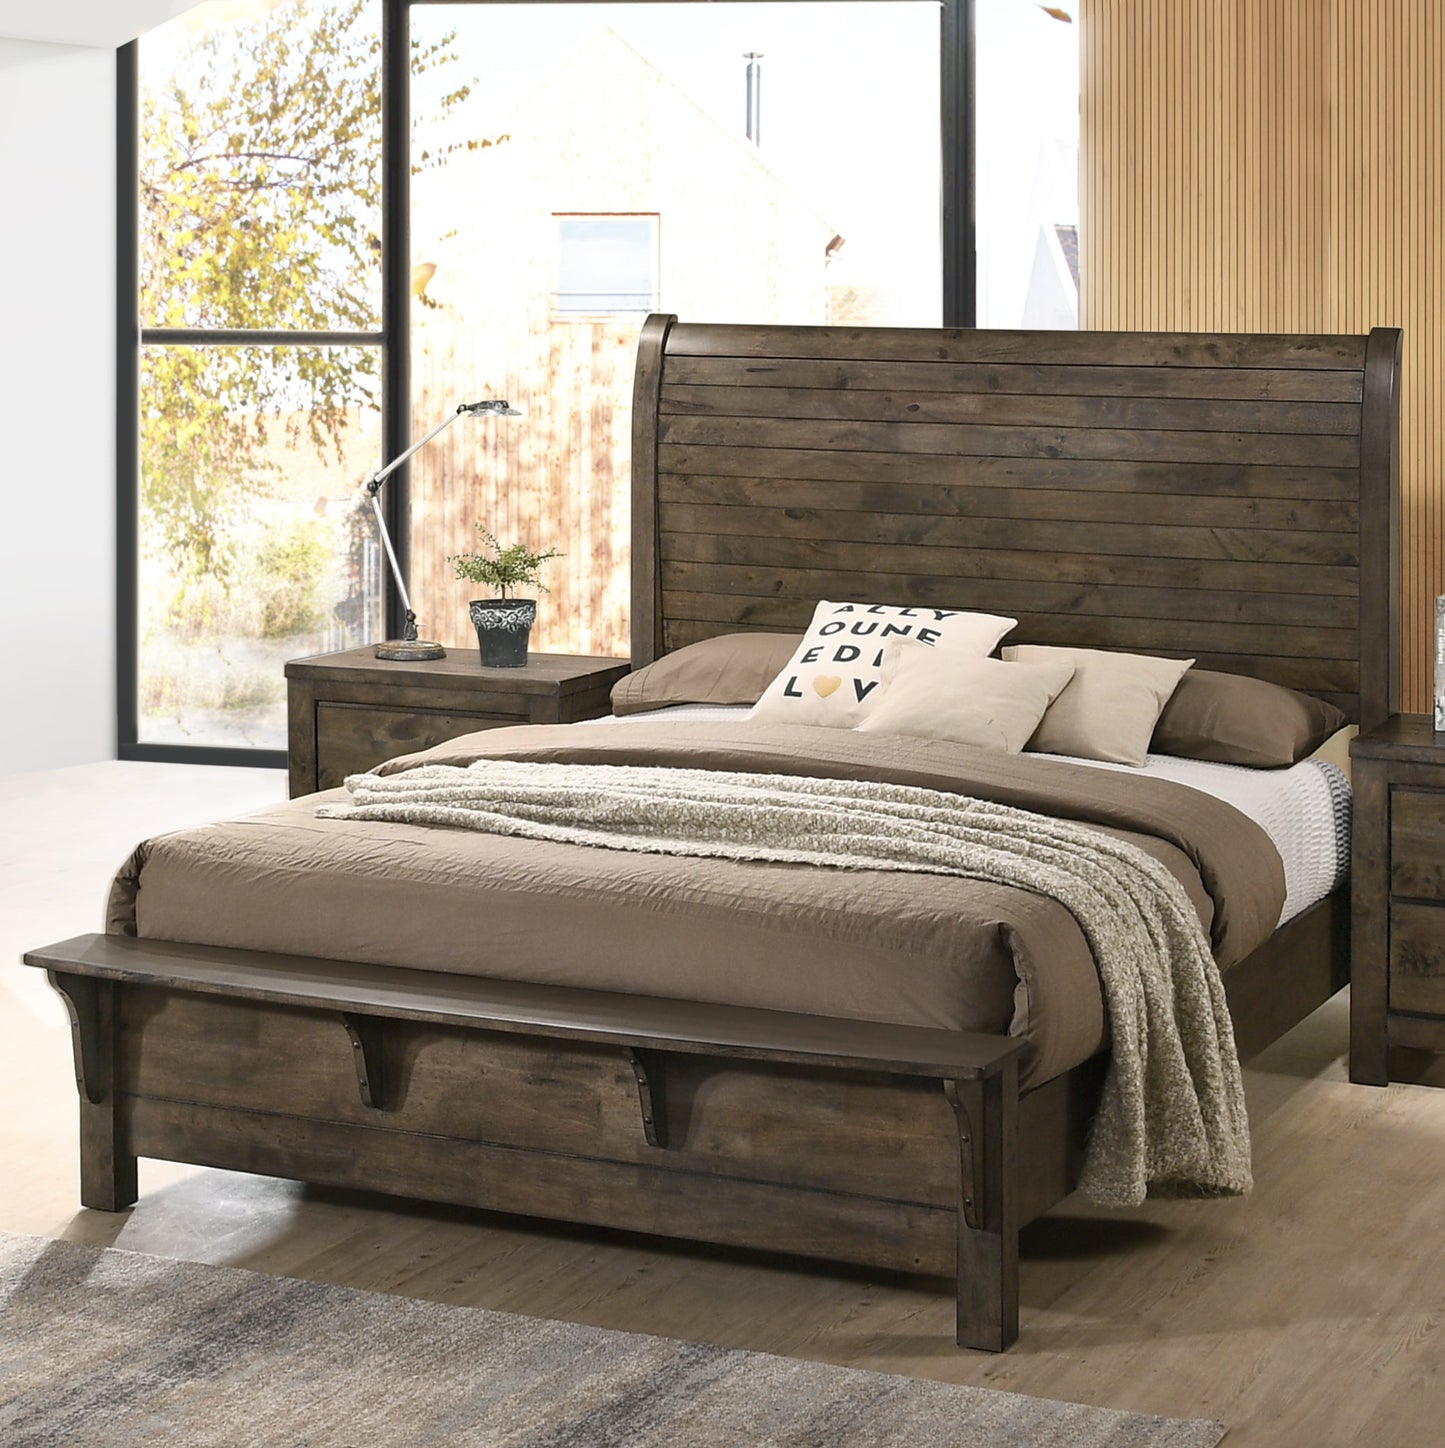 Pavita Rustic Sleigh Bed Collection